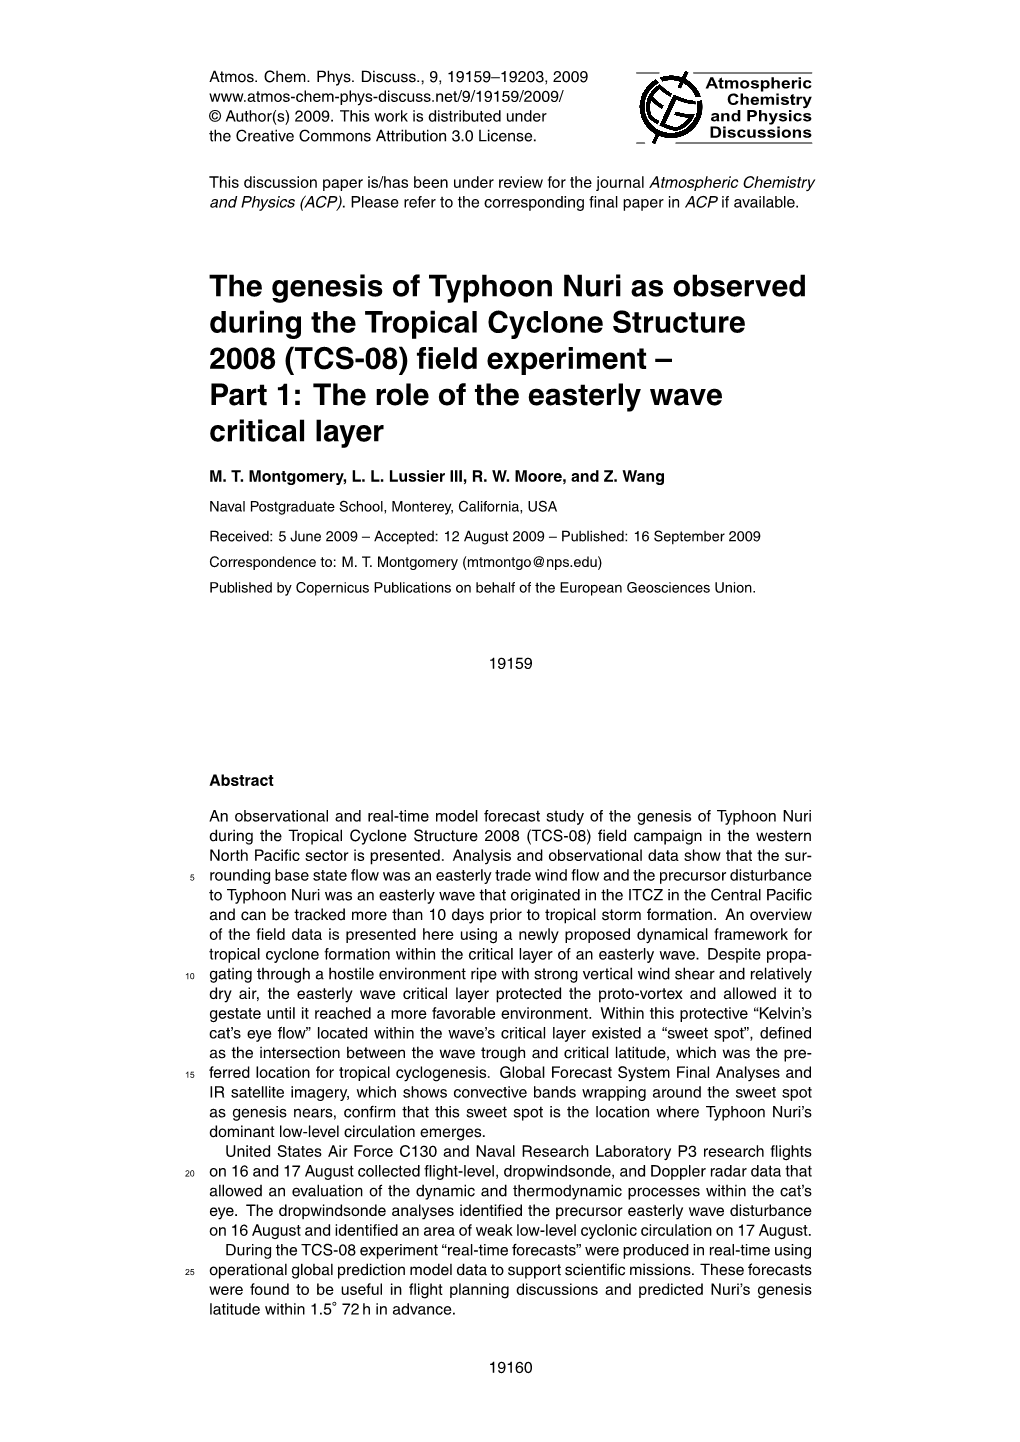 The Genesis of Typhoon Nuri As Observed During the Tropical Cyclone Structure 2008 (TCS-08) ﬁeld Experiment – Part 1: the Role of the Easterly Wave Critical Layer